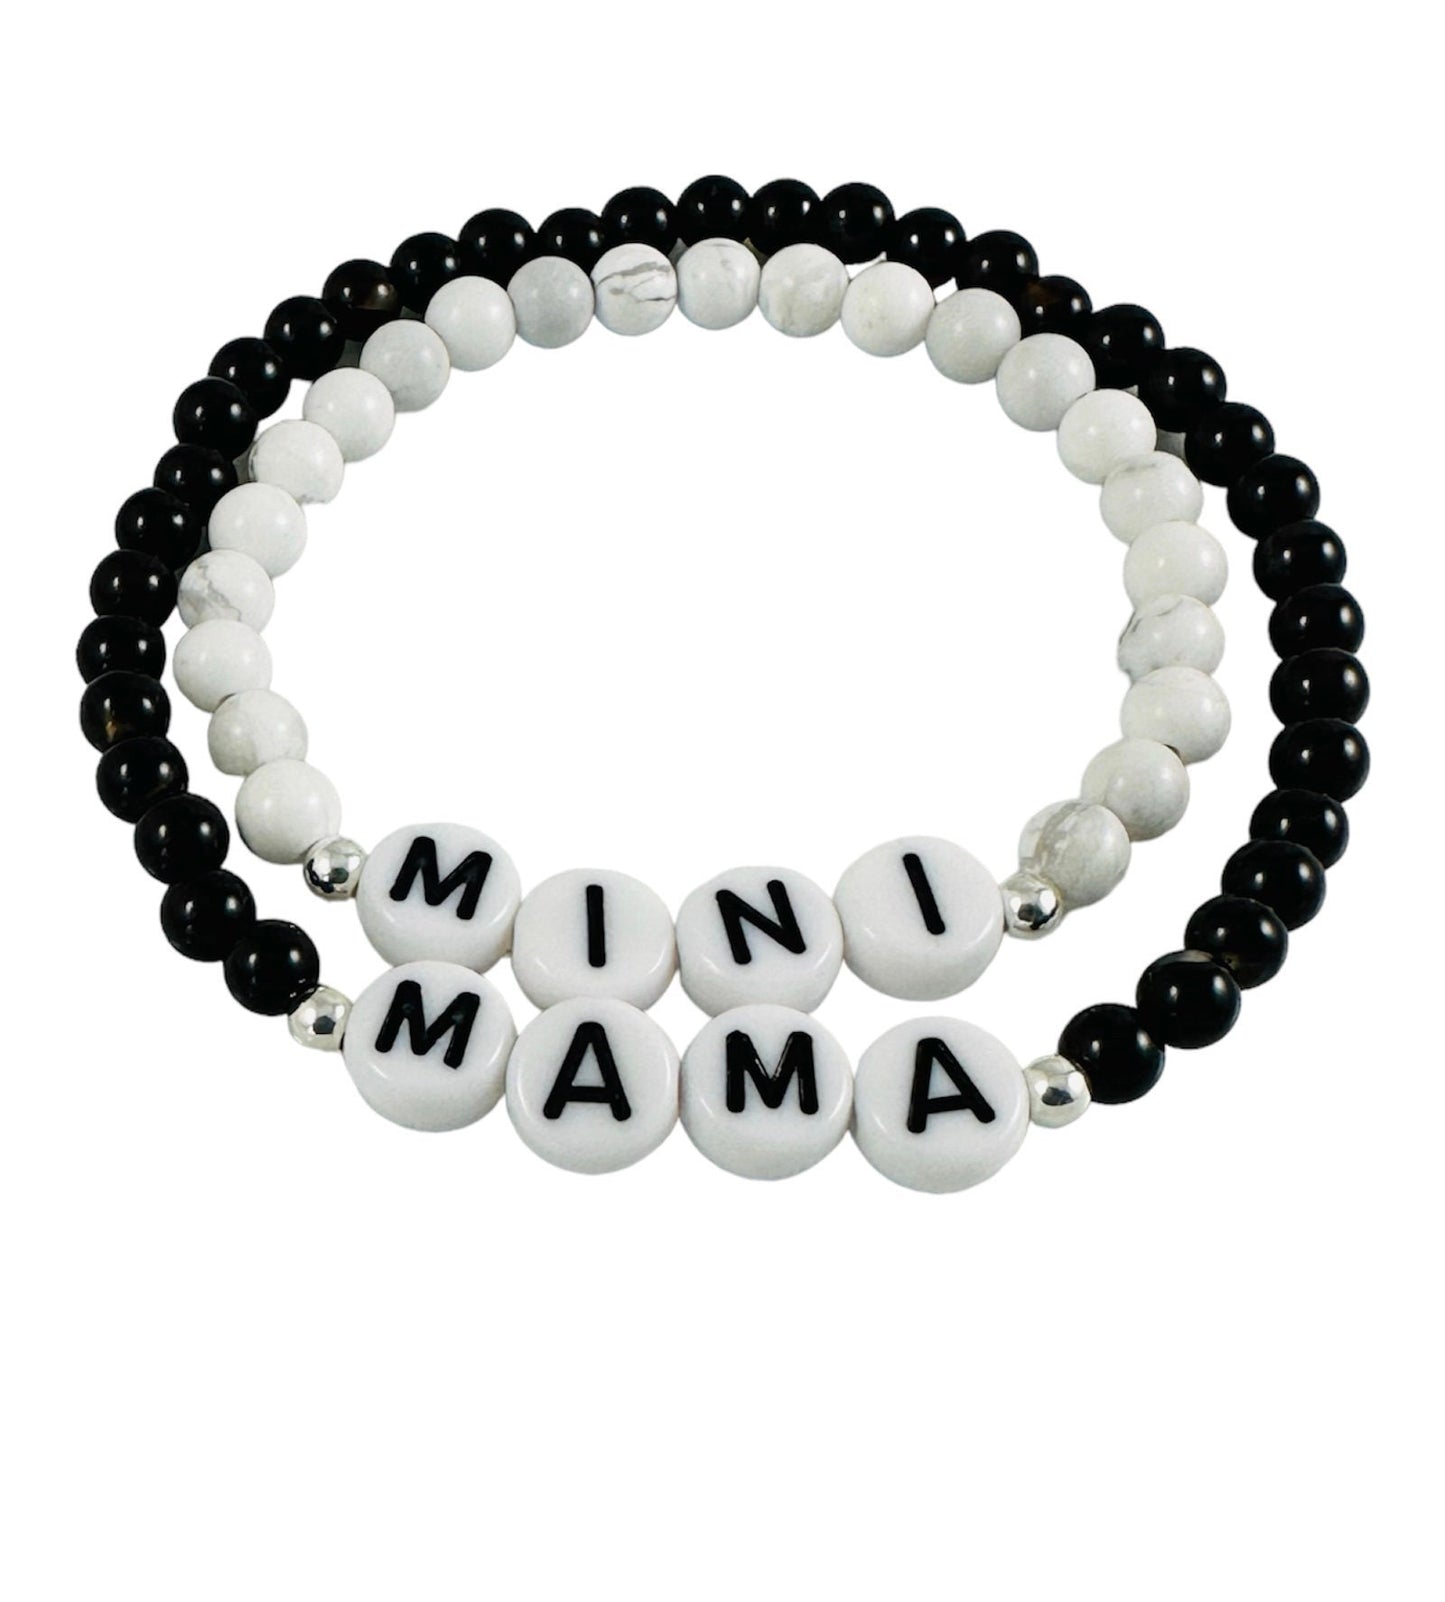 Mama Bracelet,Mother's Day gifts,Gifts For Moms,Mom Bracelet,Gold Beaded Mama Bracelet,New Mom Present,Mother Mama Mom Mommy Mini Bracelet